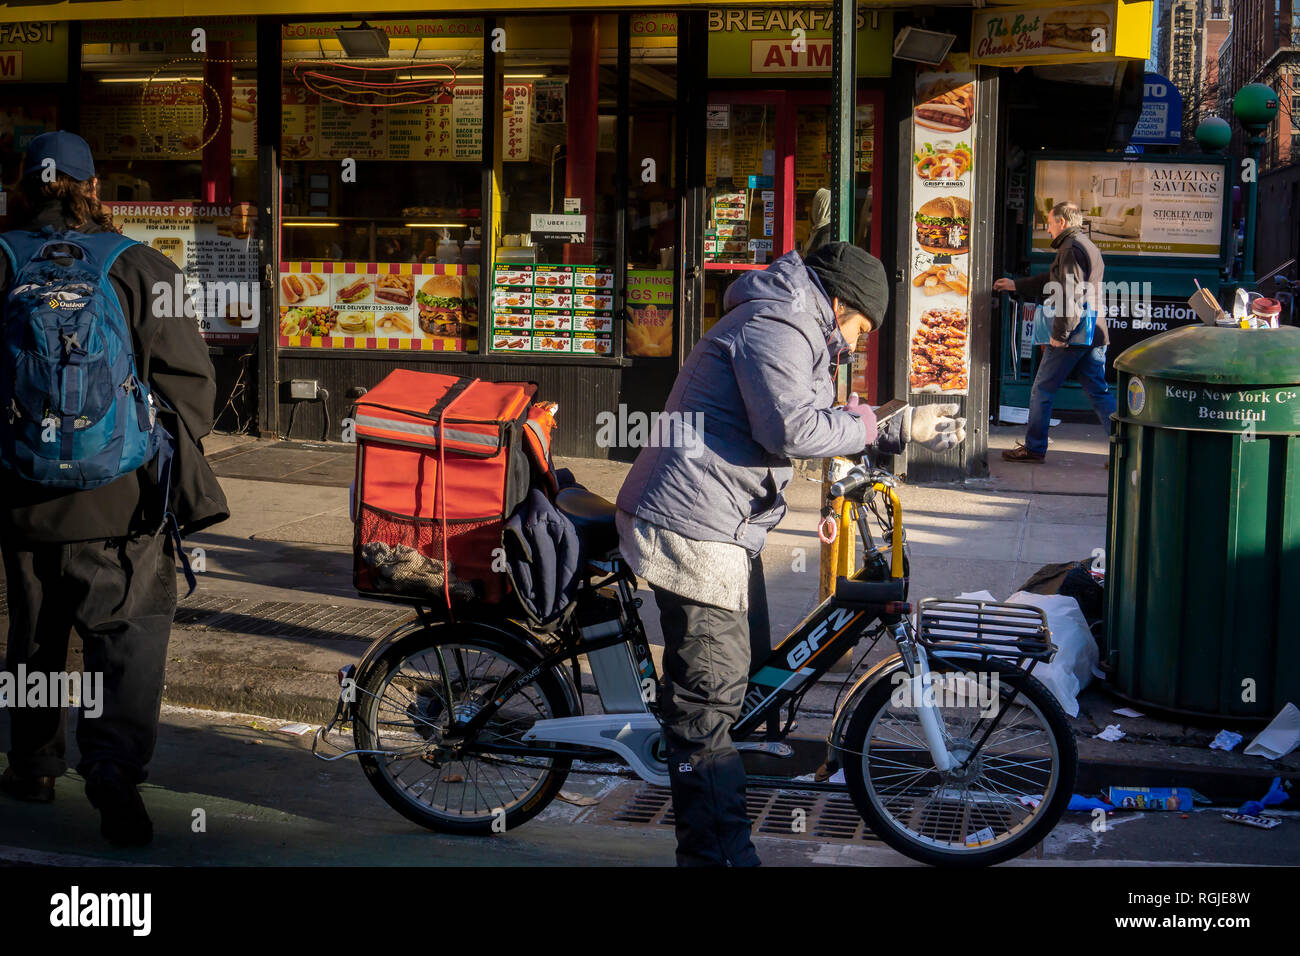 A deliveryman on his Dongguan BuFengZhe (BFZ) electric bike making deliveries in New York in the Chelsea neighborhood on Tuesday, January 22, 2019. (Â© Richard B. Levine) Stock Photo